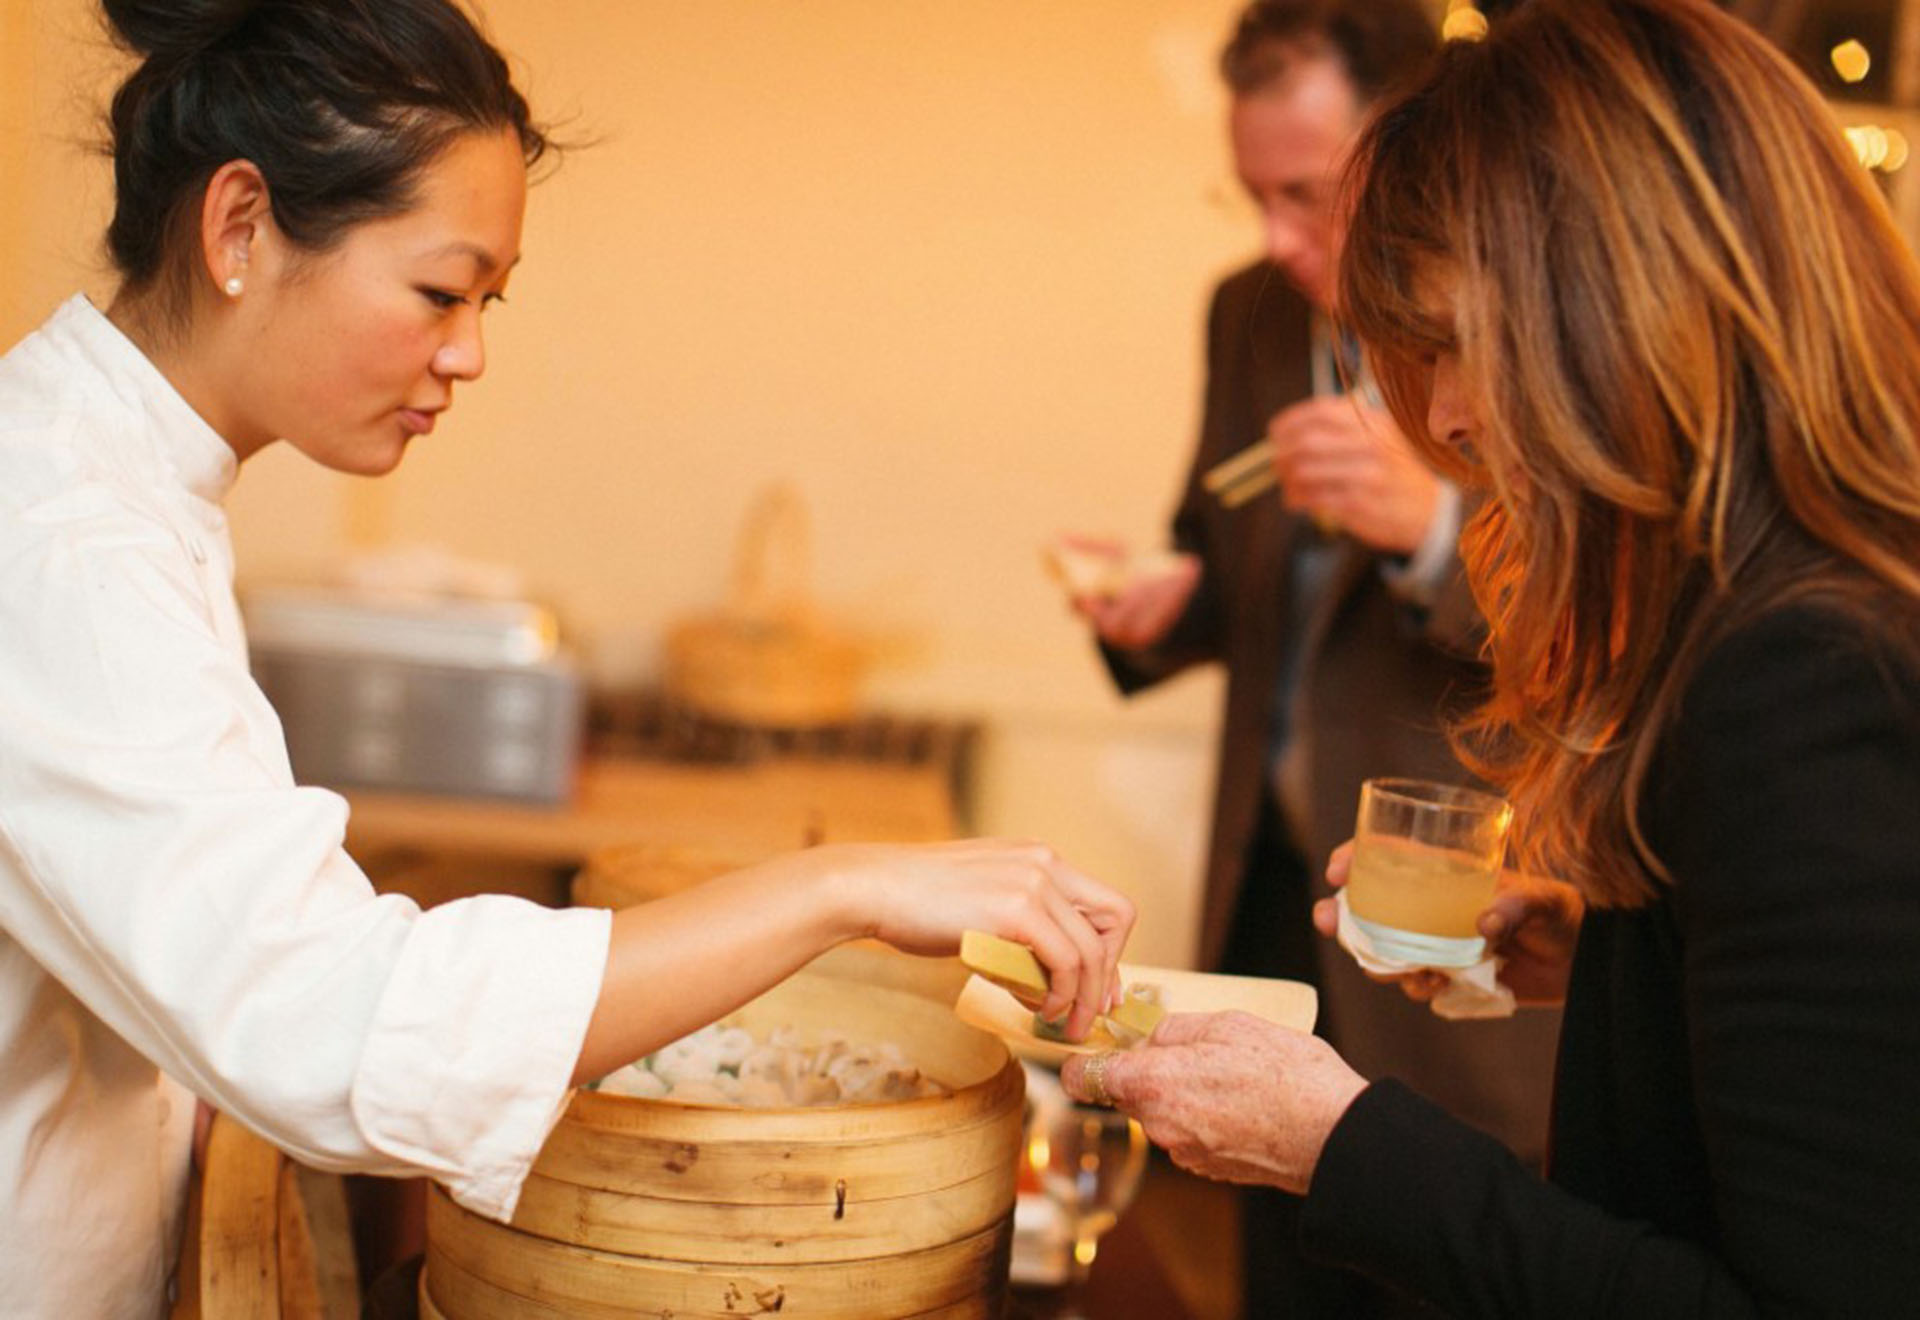 A young woman in a white chef's jacket serves dim sum to a guest at a fancy gala.